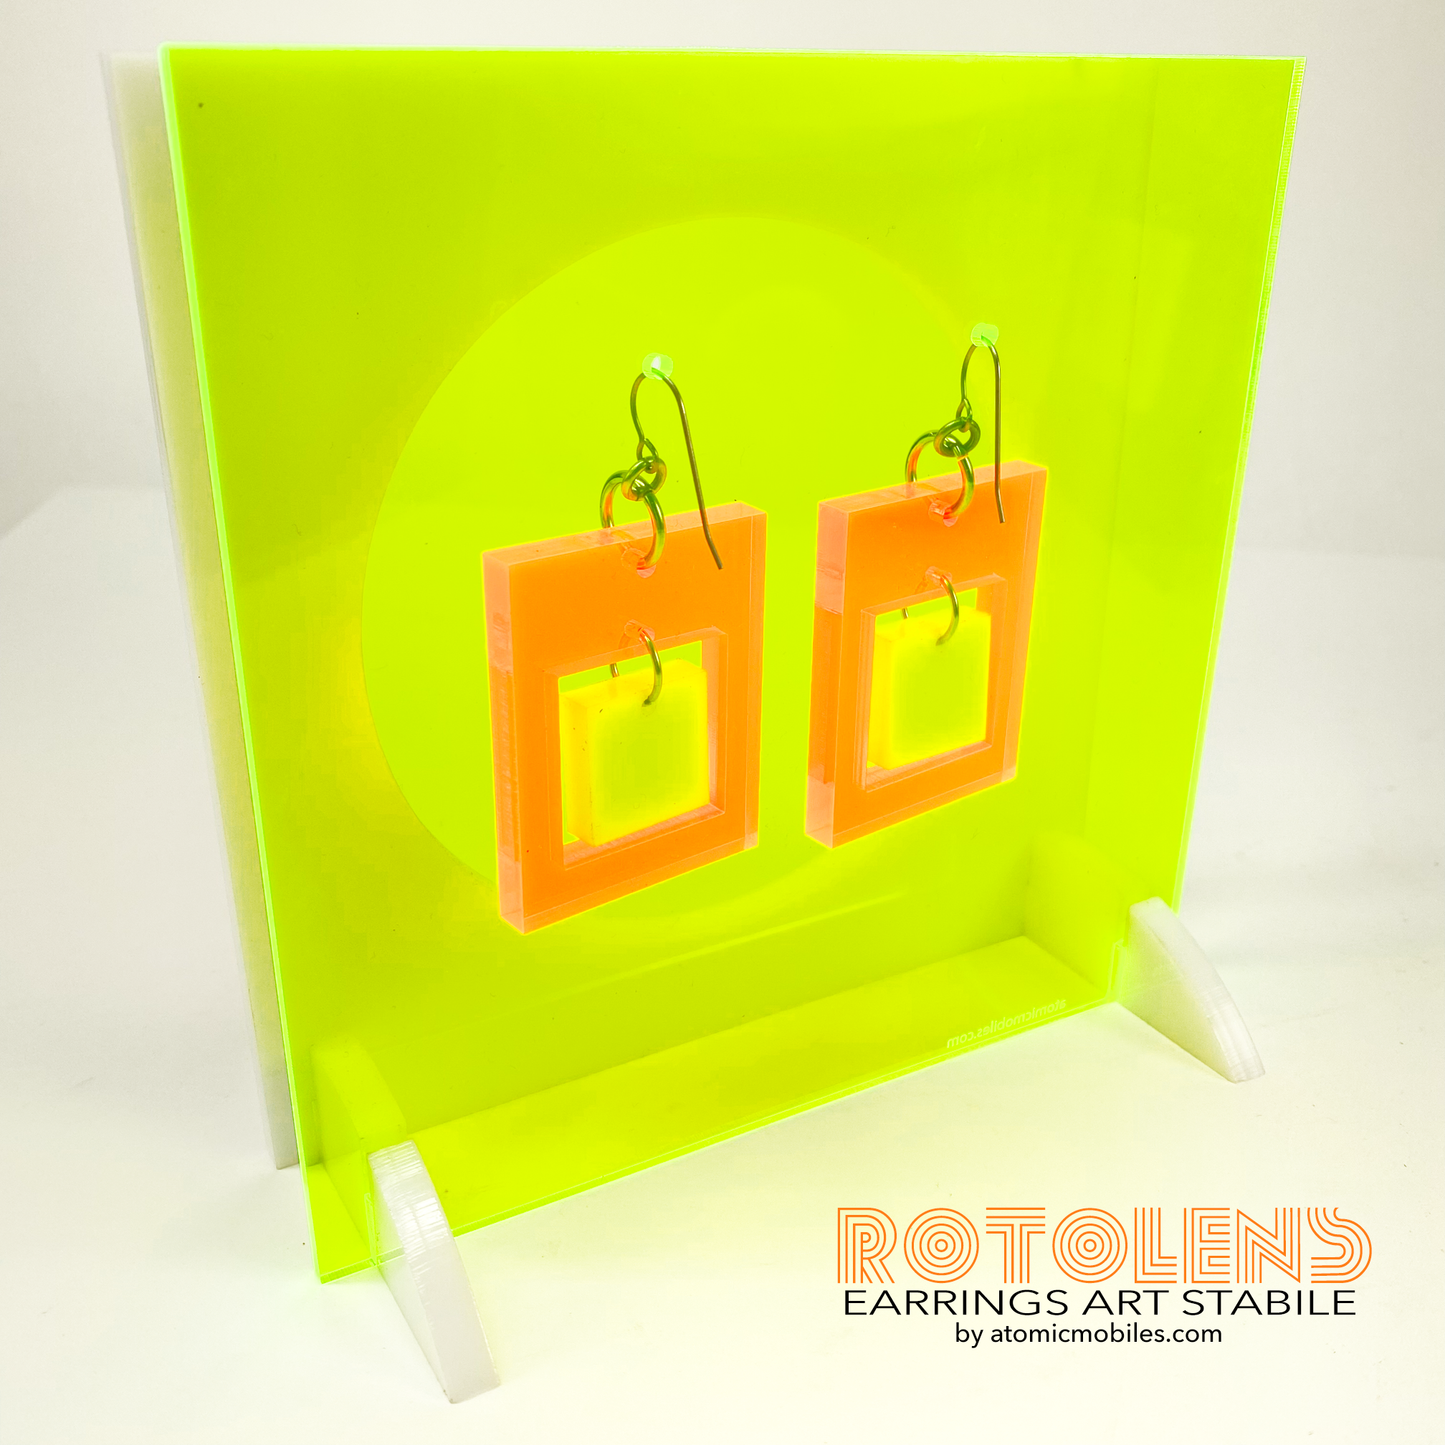 Back view of Stunning Art Earrings Stabile Set featuring transparent neon green backing with orange and white earrings - mid century modern art for Groovy People by AtomicMobiles.com